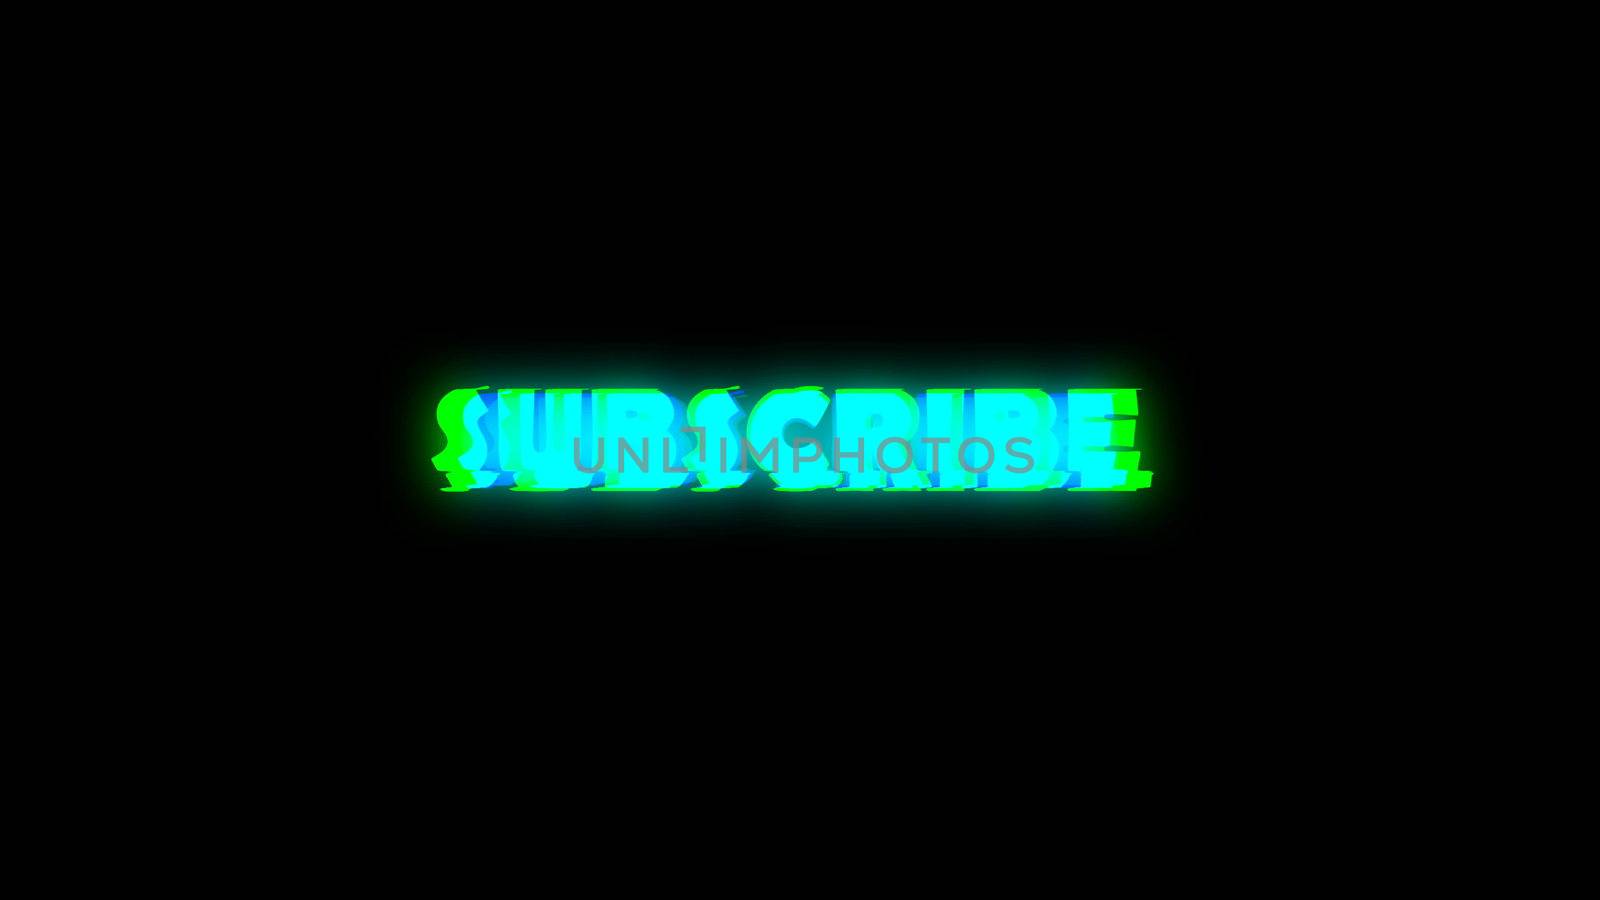 Subscribe text with bad signal. Glitch effect. 3d rendering